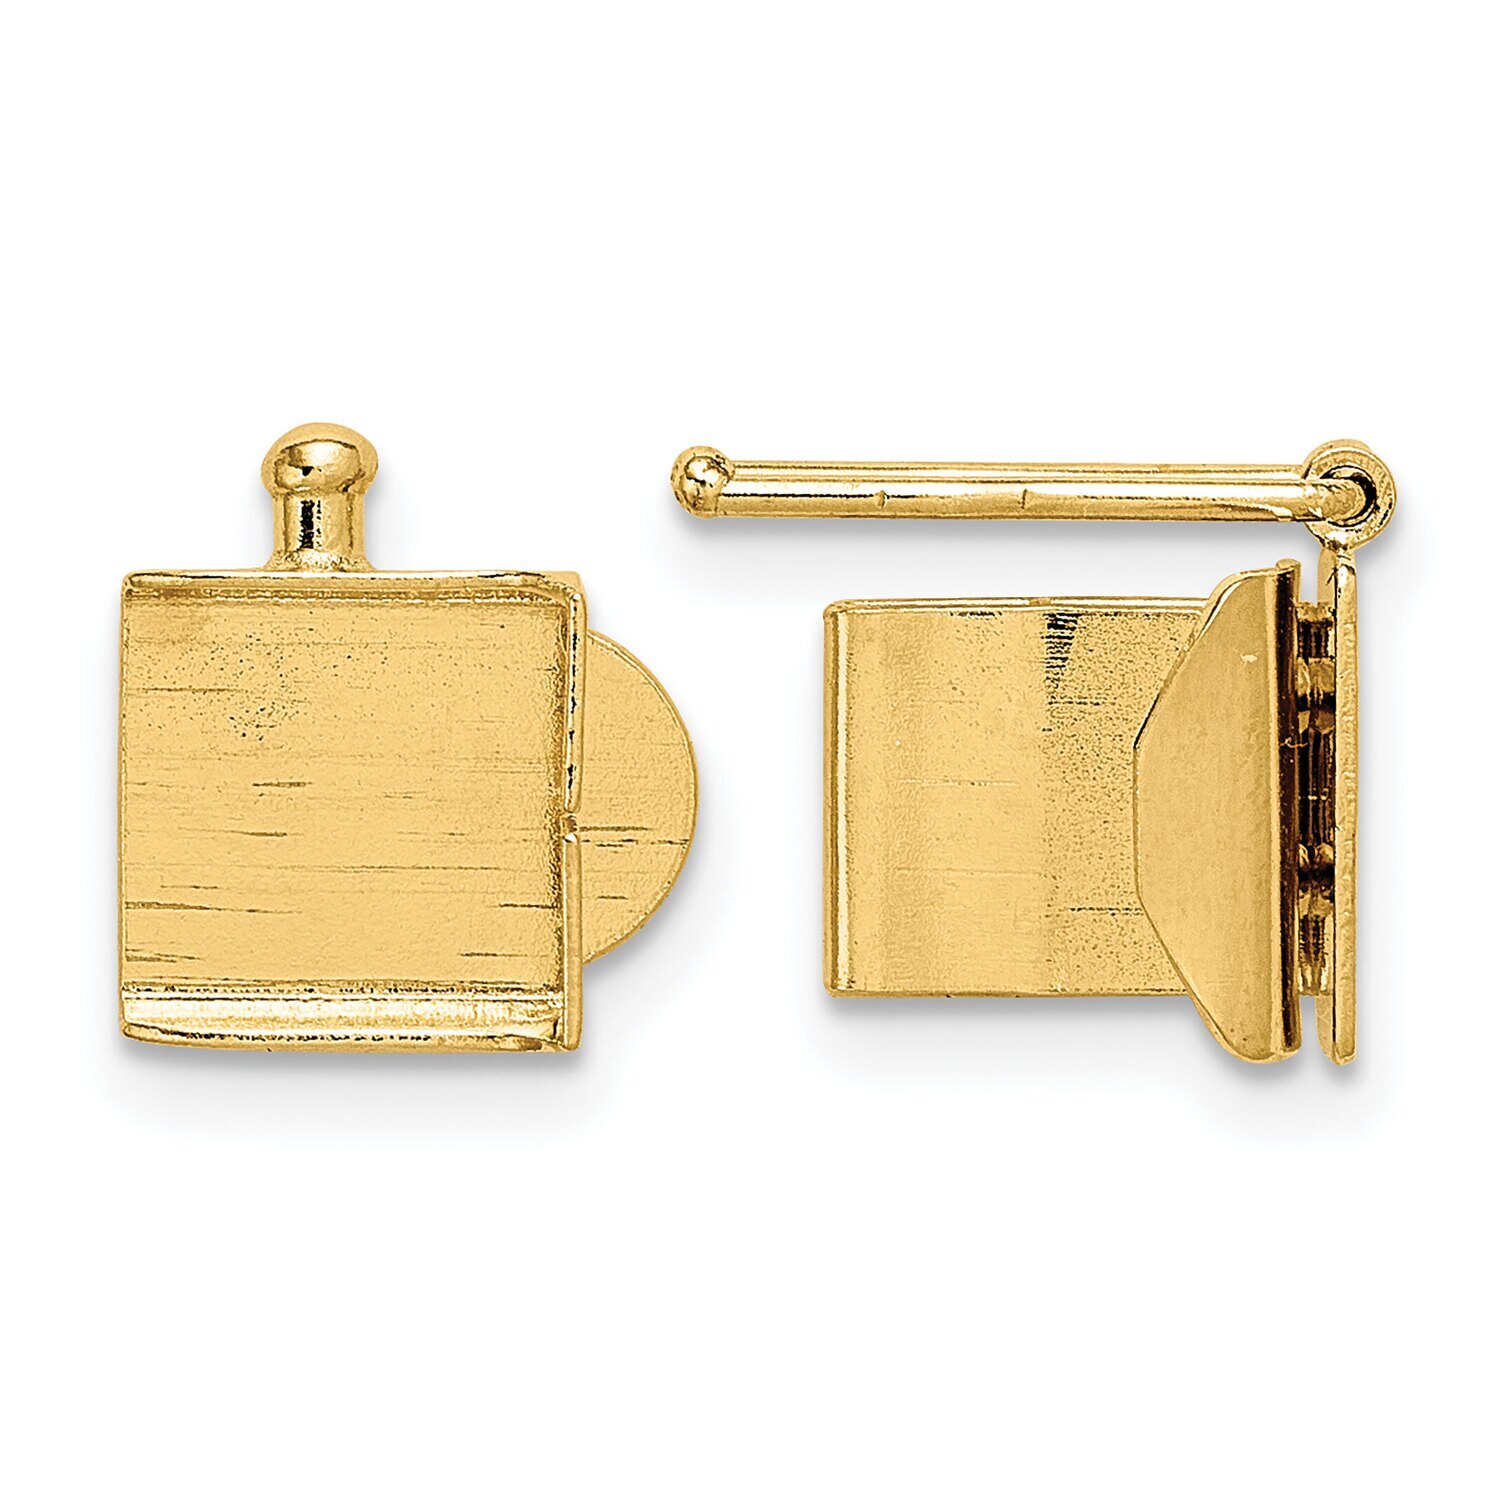 Folded Tongue and Box Clasp 14k Yellow Gold YG1842